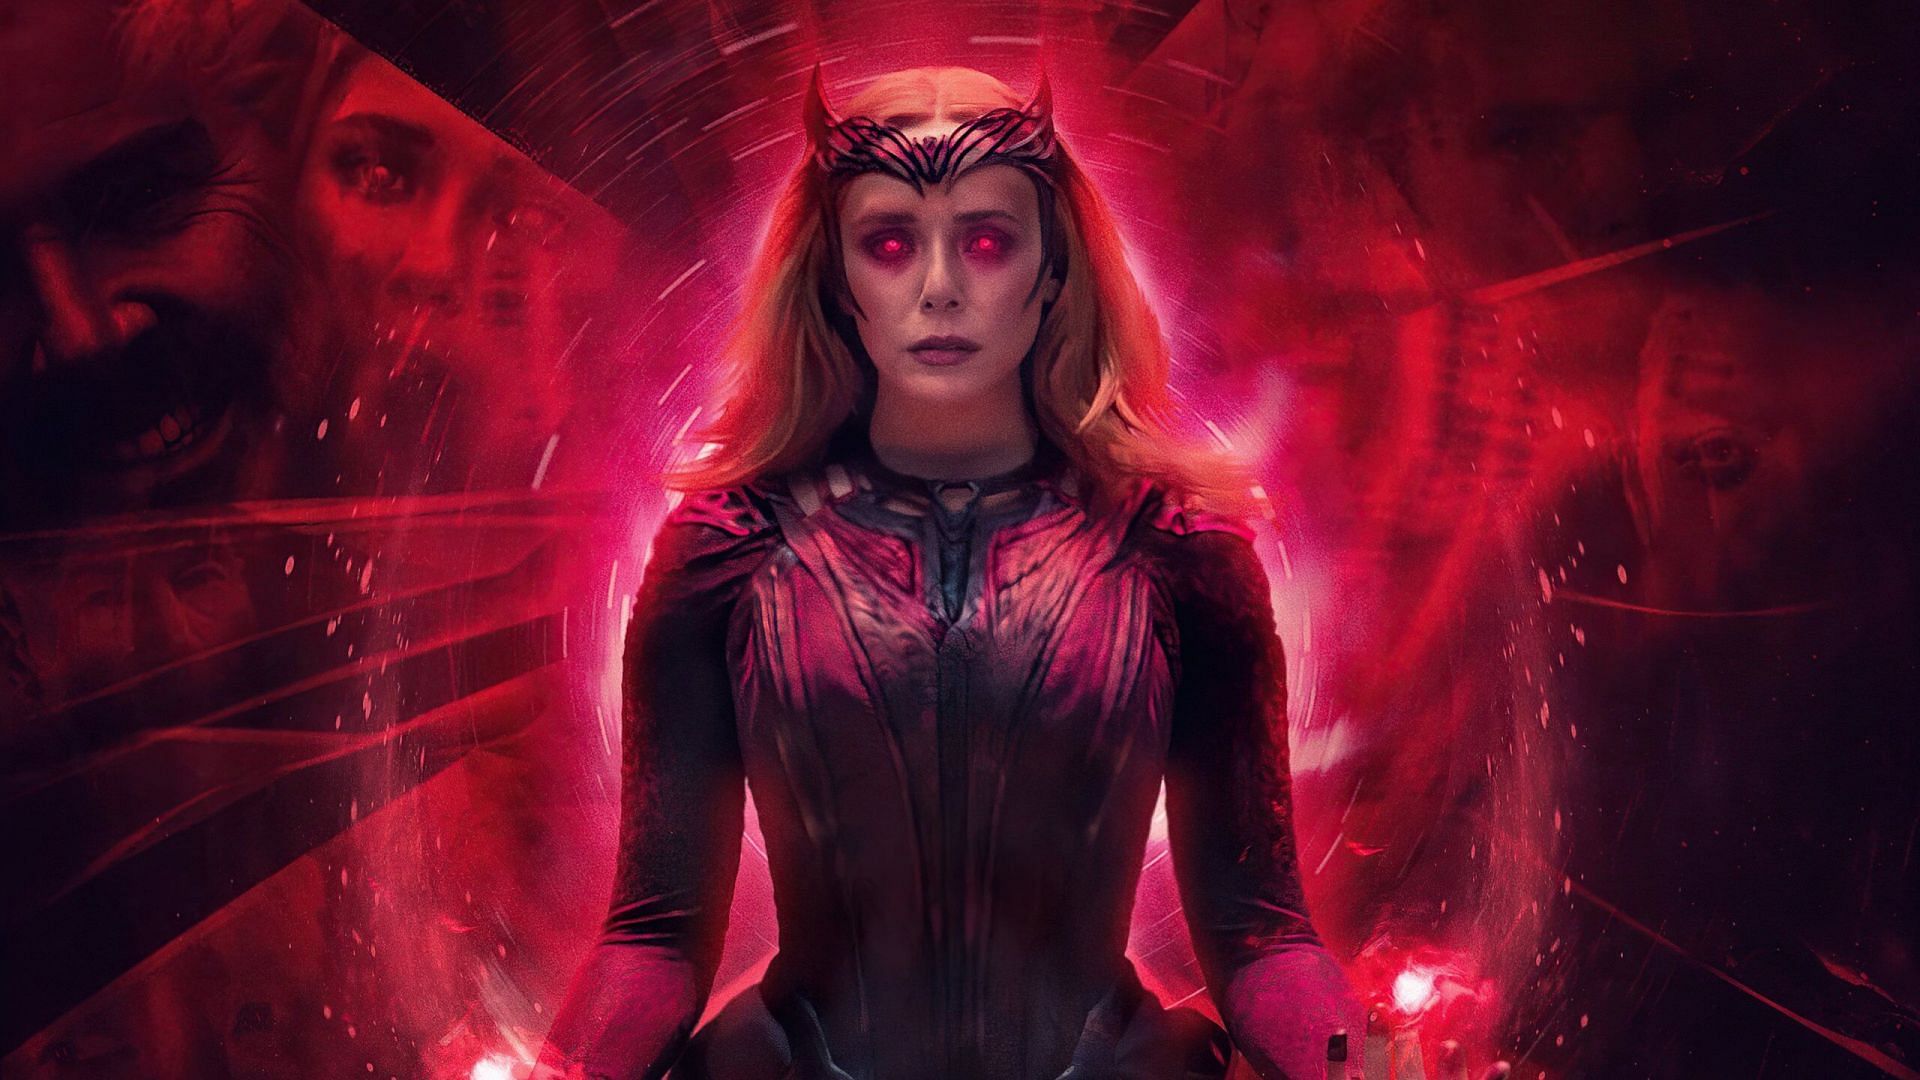 Scarlet Witch invites hate as well as admiration (Image credit Marvel Studios)